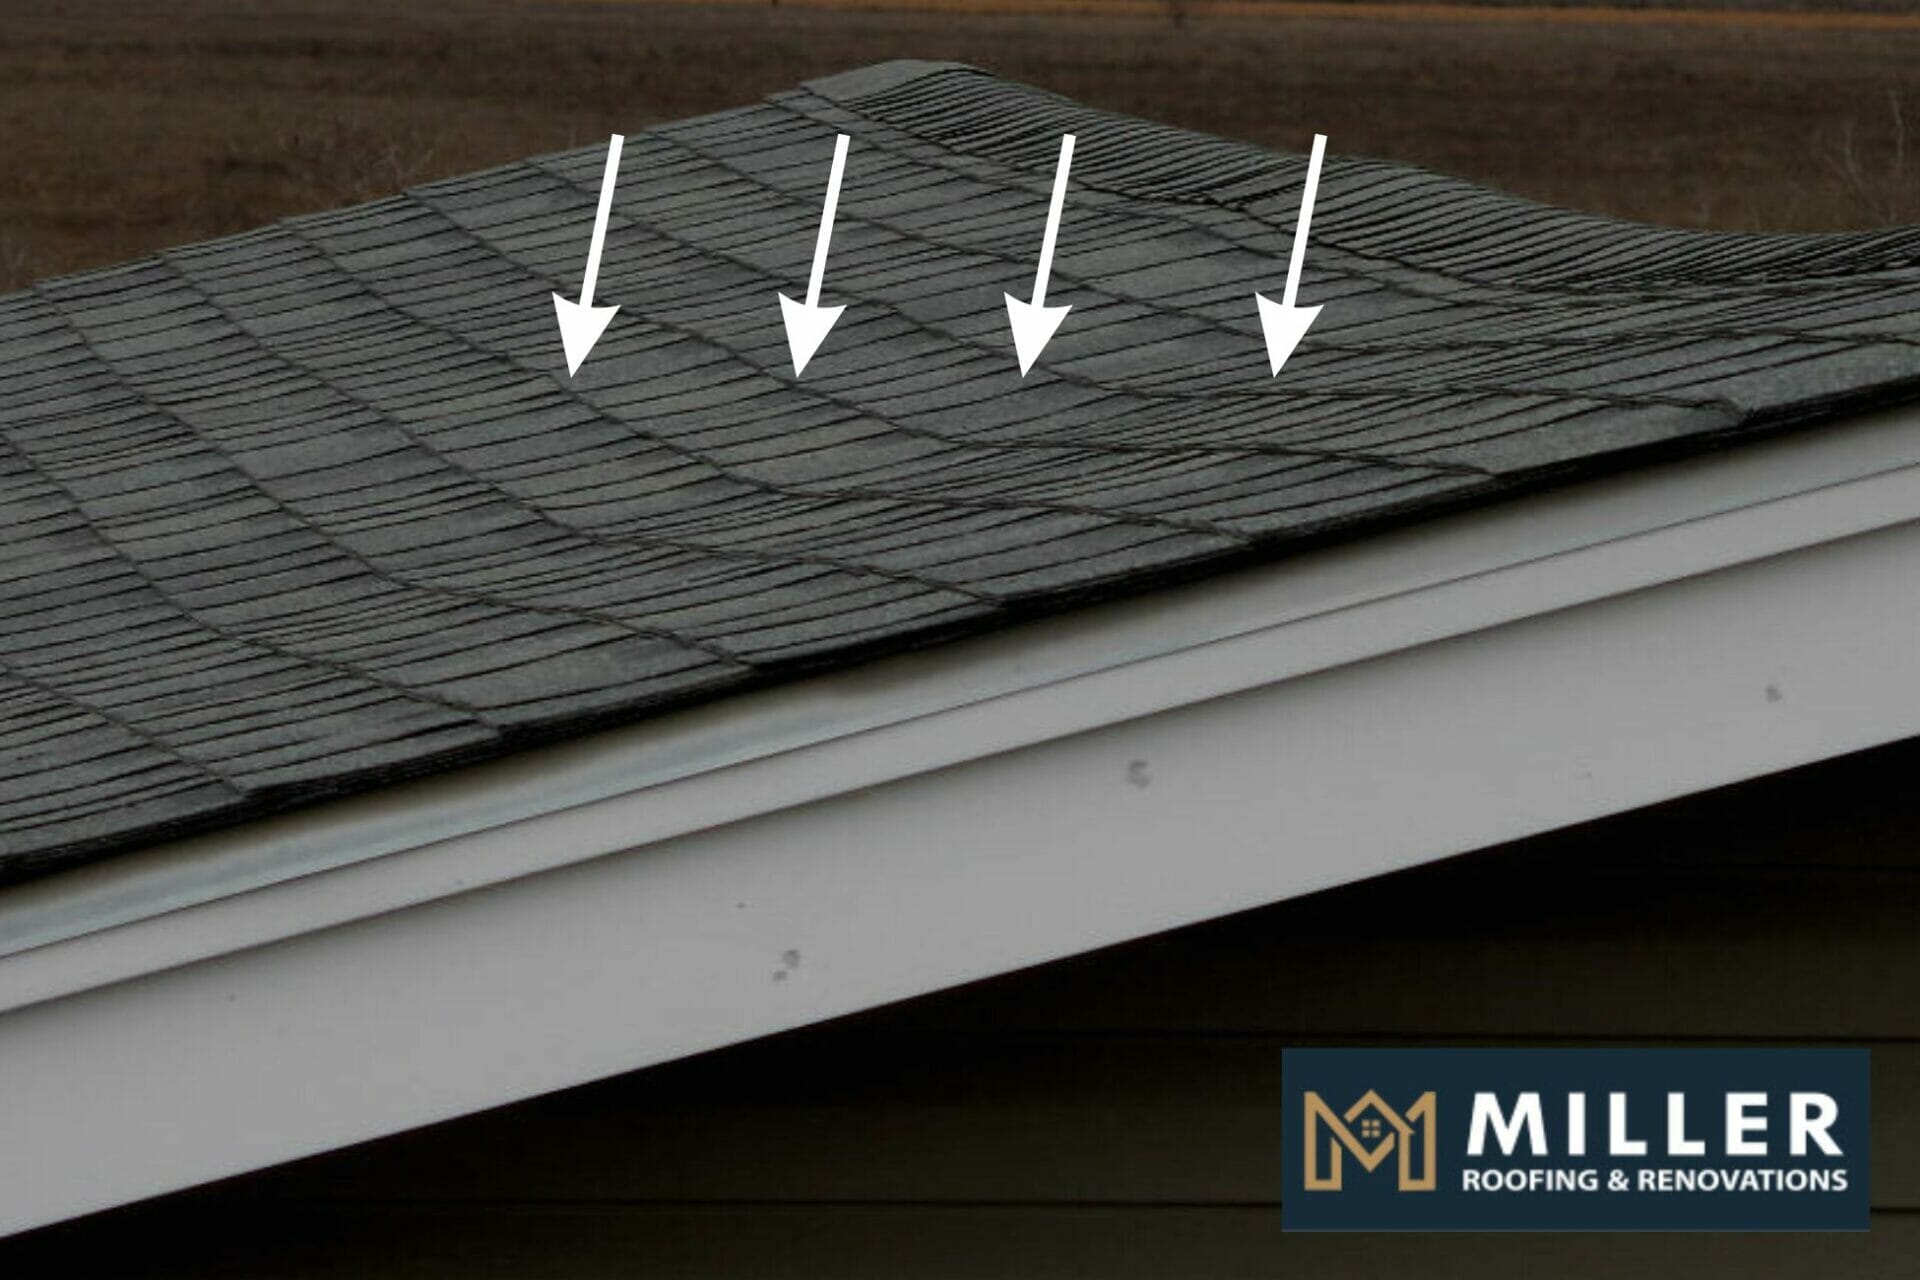 How Do You Fix A Sagging Roof Without Replacing It?